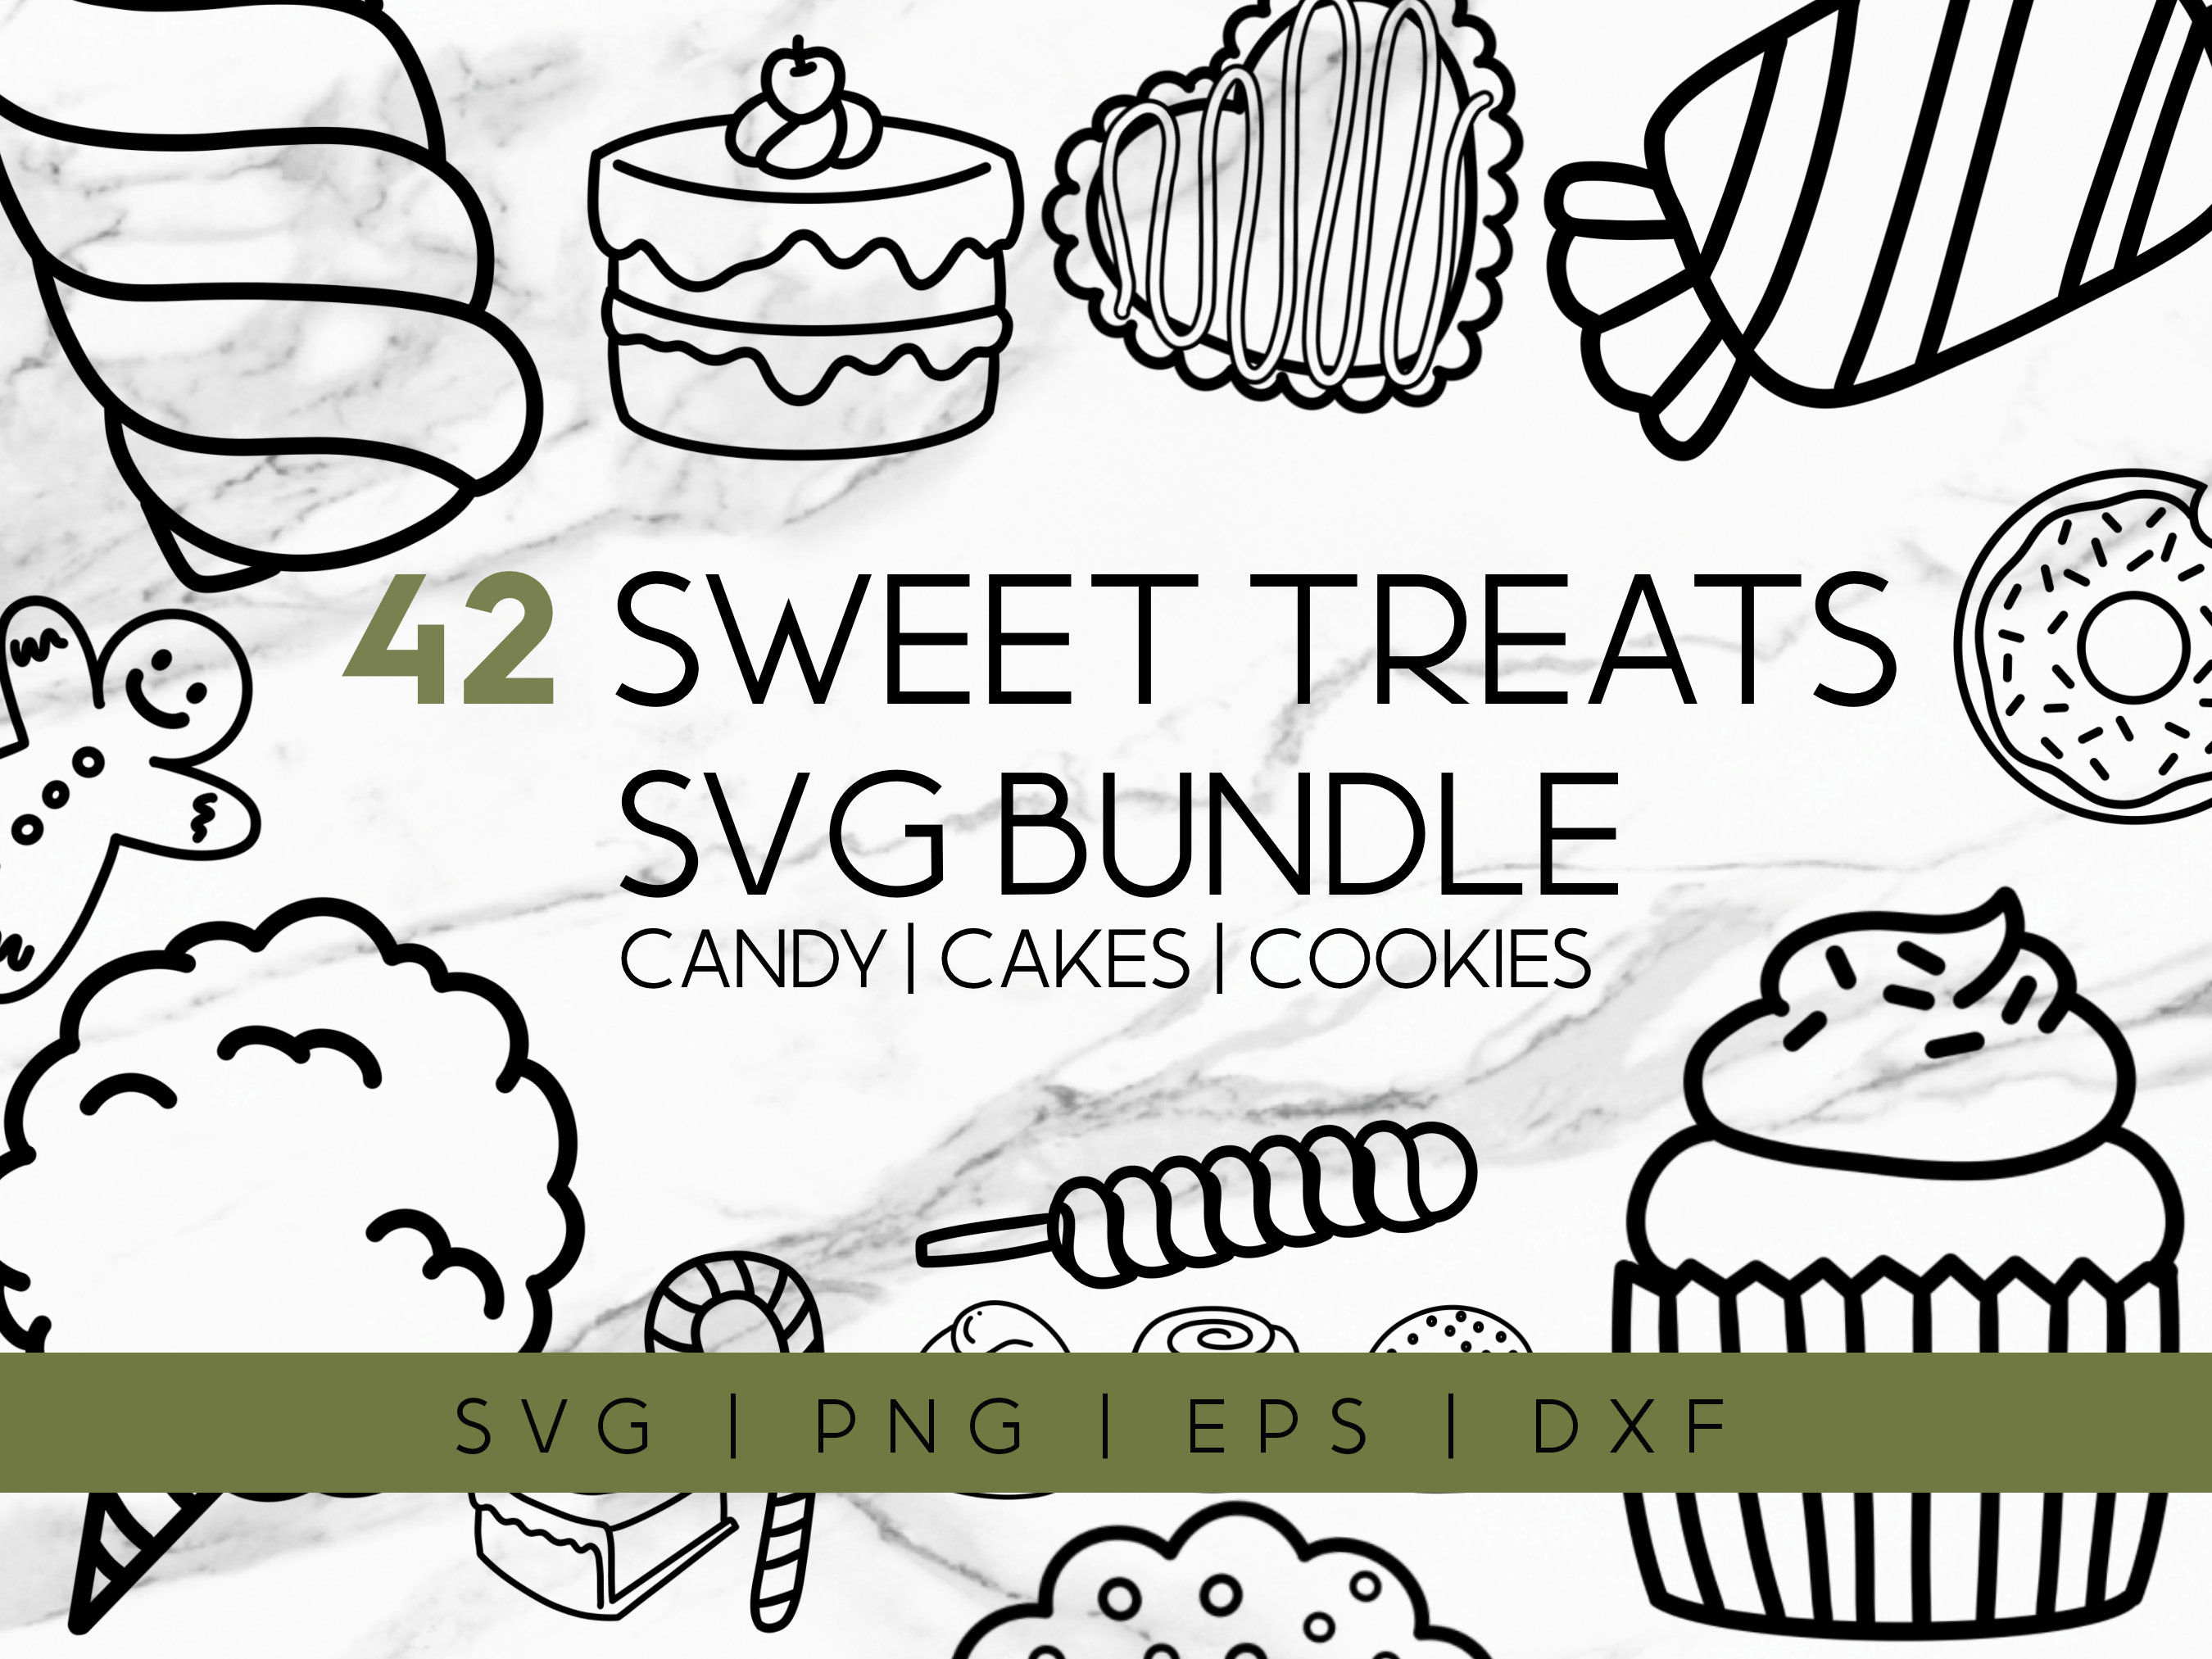 42 Sweet Treats Svg Bundle Cute Doodle Cakes Cookies Candy - Etsy